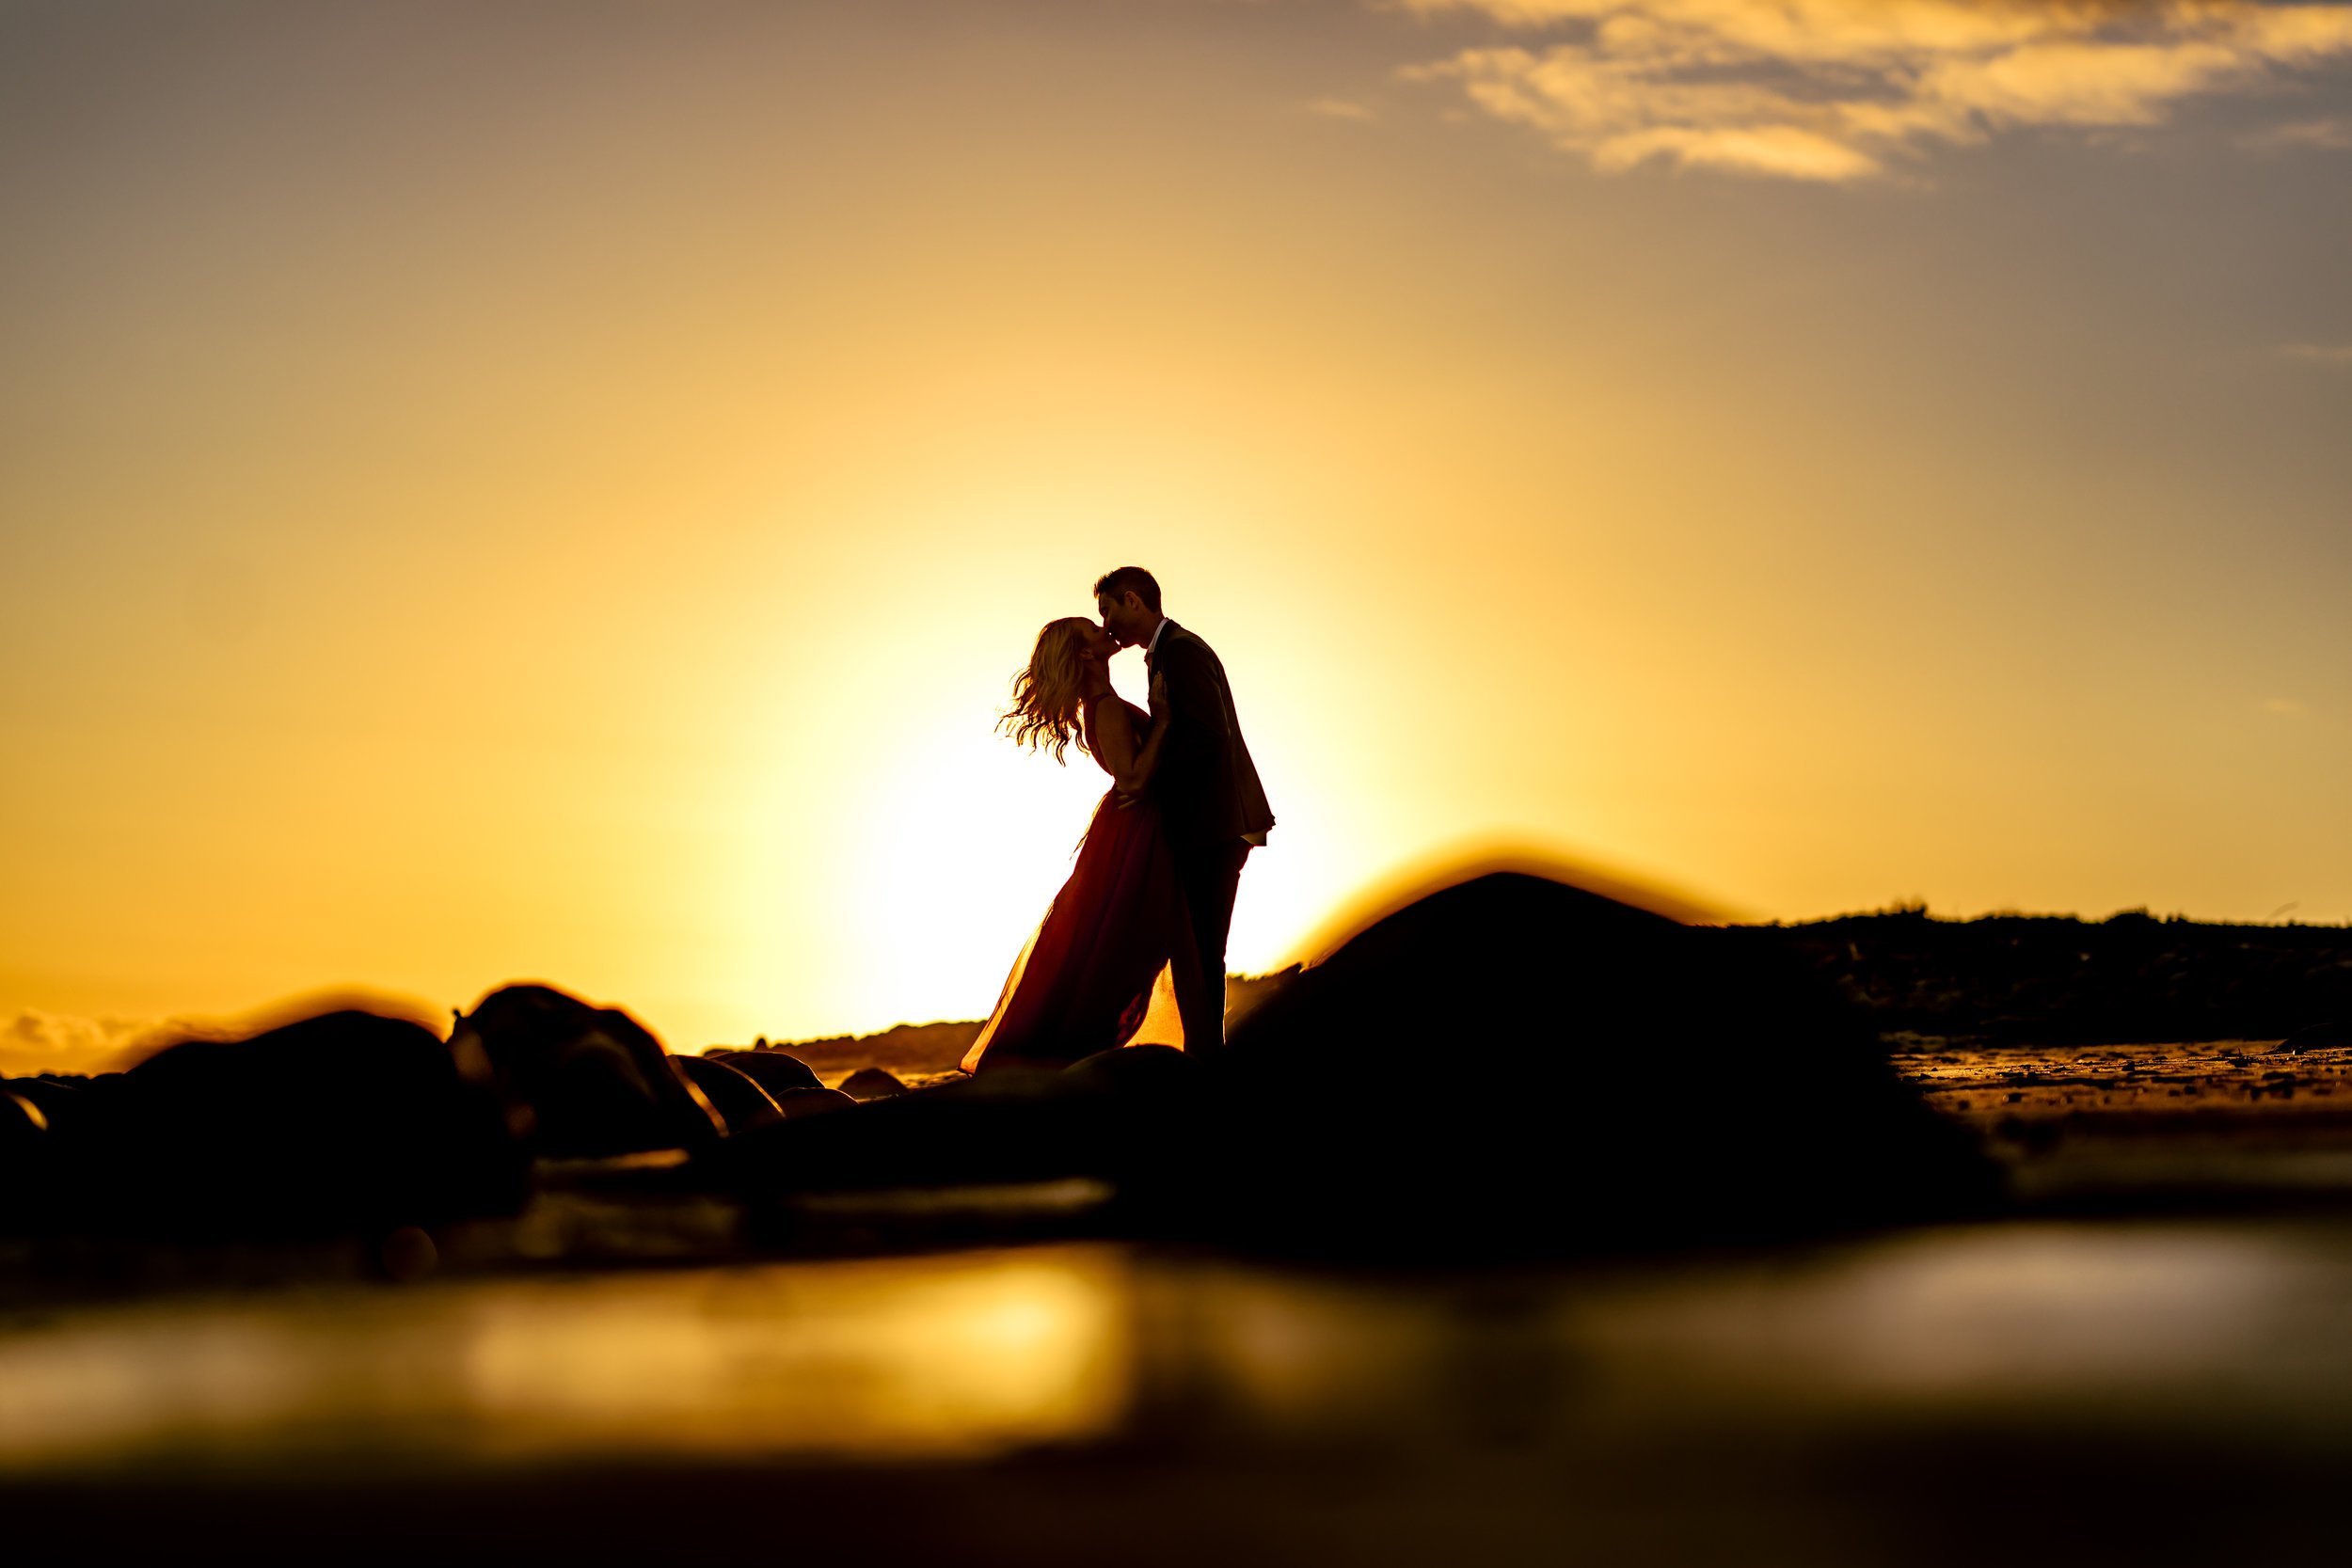 santabarbarawedding.com | Rewind Photography | Butterfly Beach | Engaged Couple on Beach at Sunset